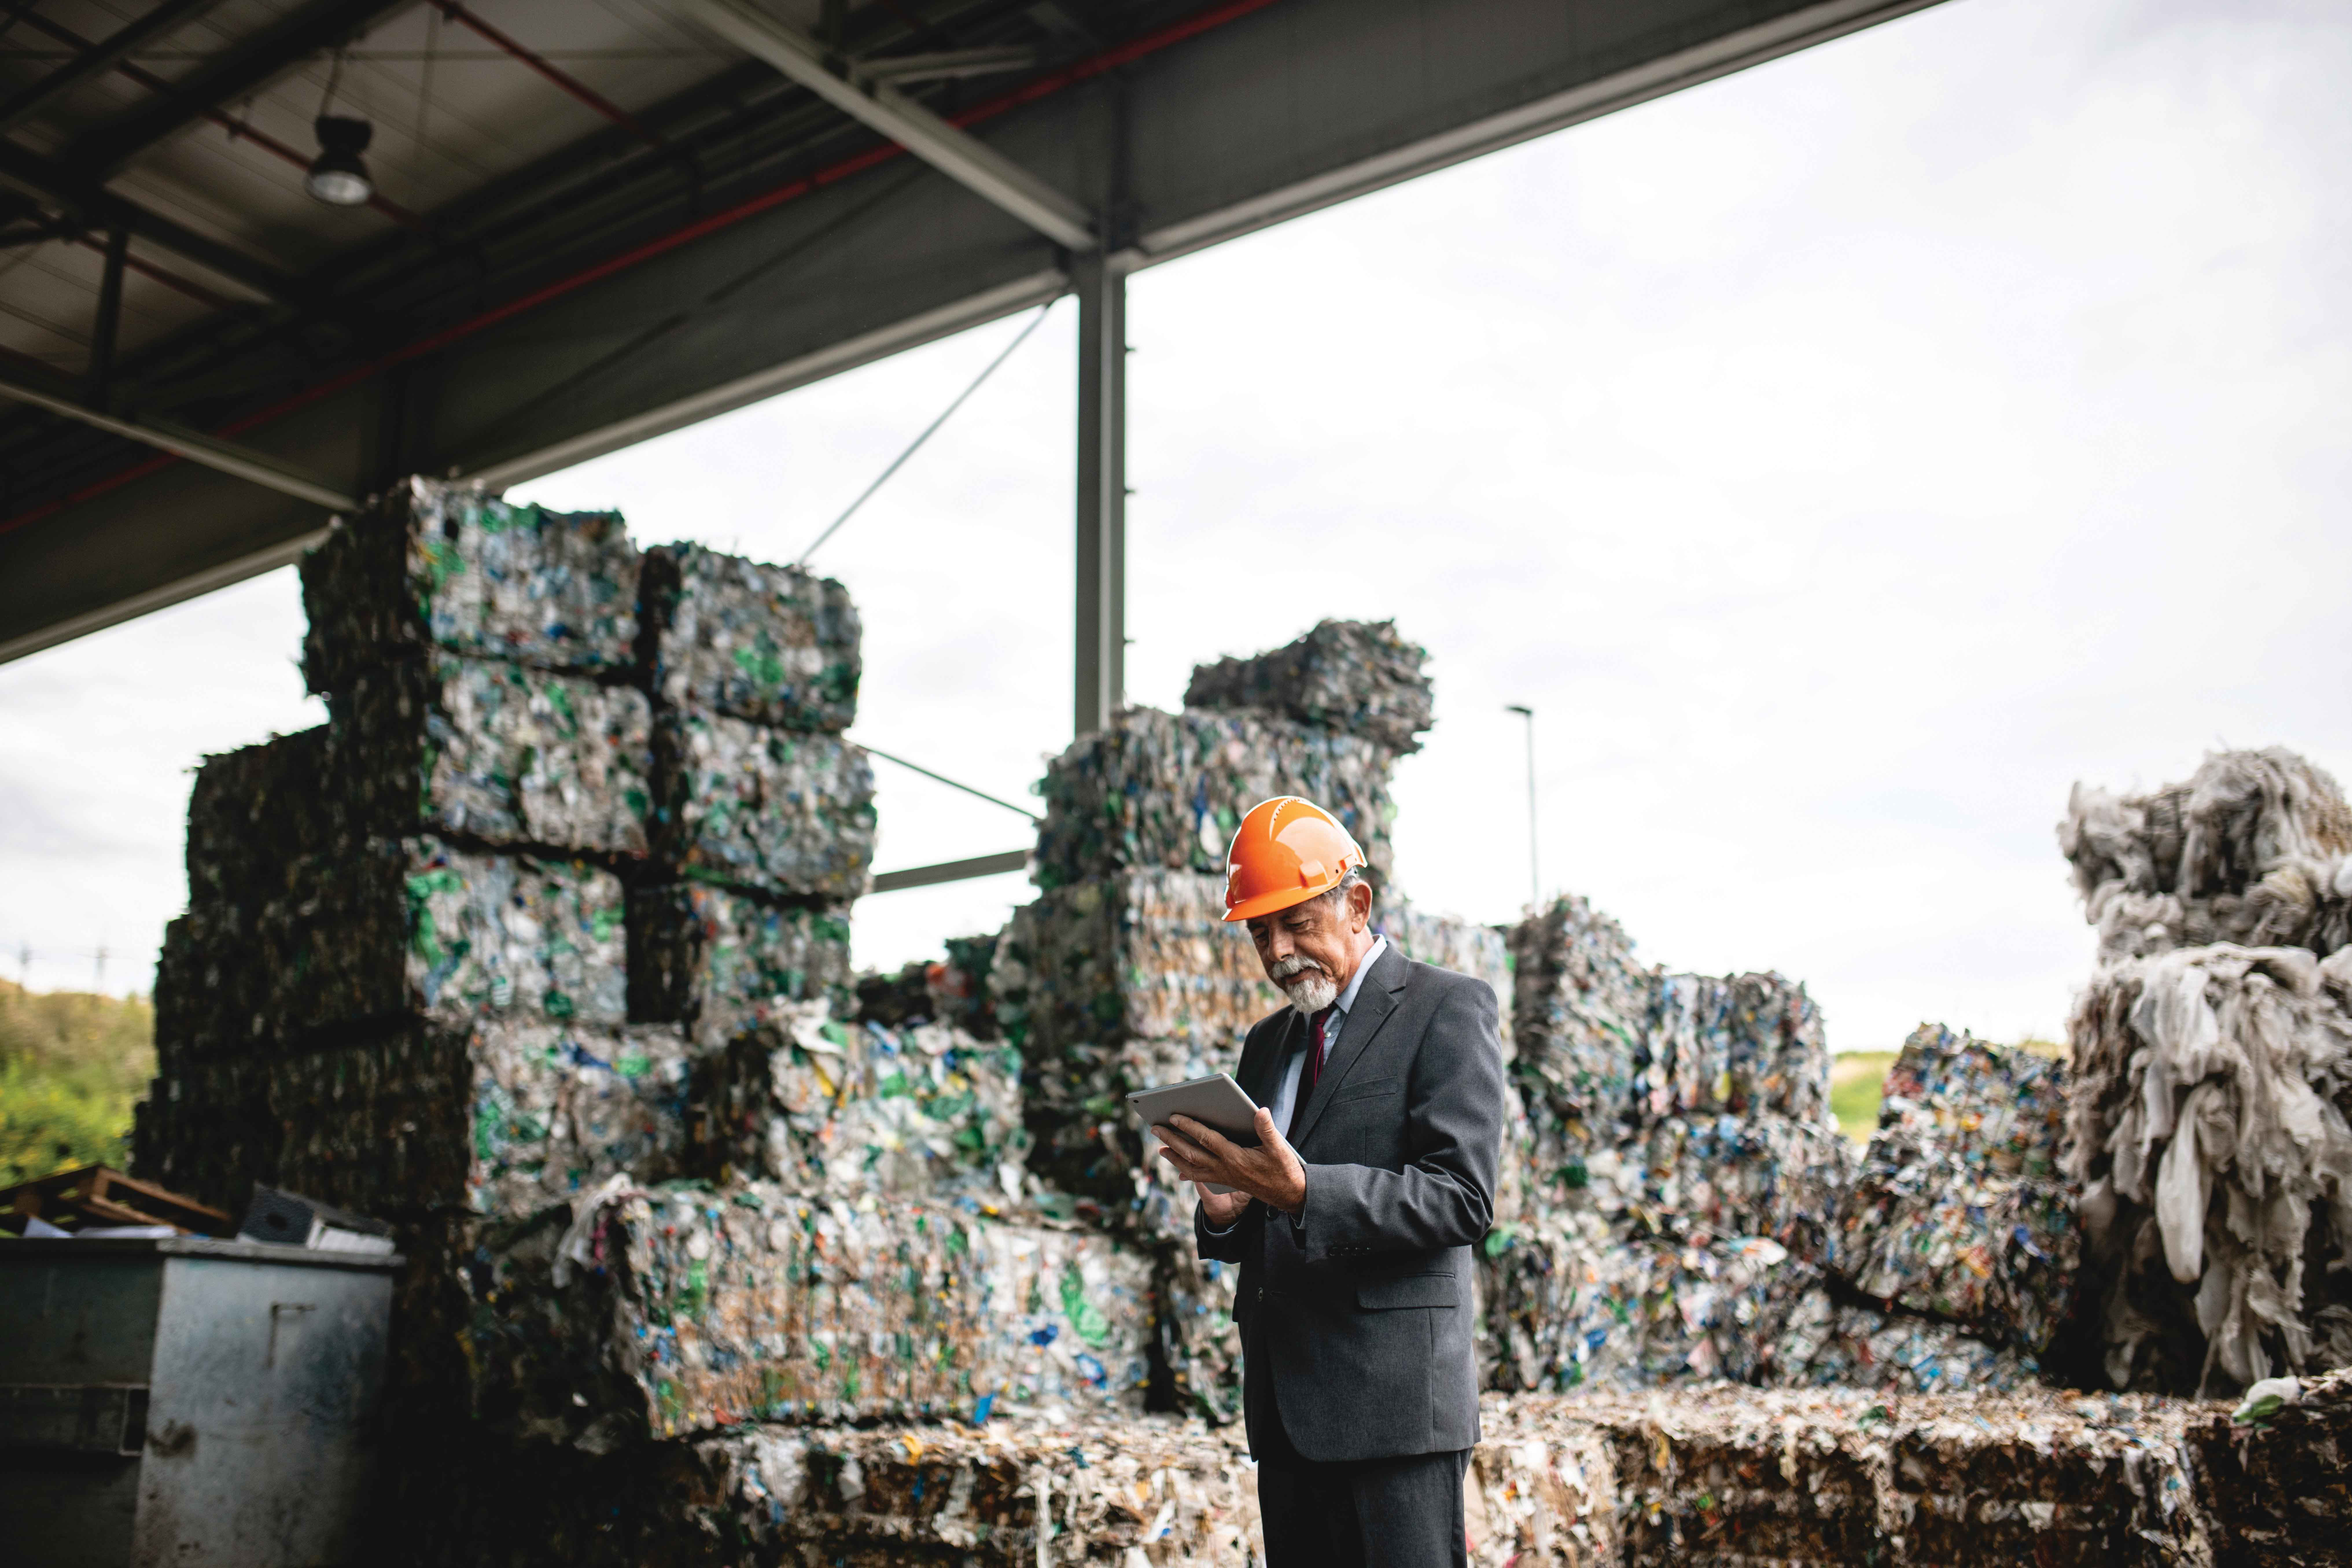 Picture of a businessman with a hard hat on looking at an iPad with packaged waste in the background